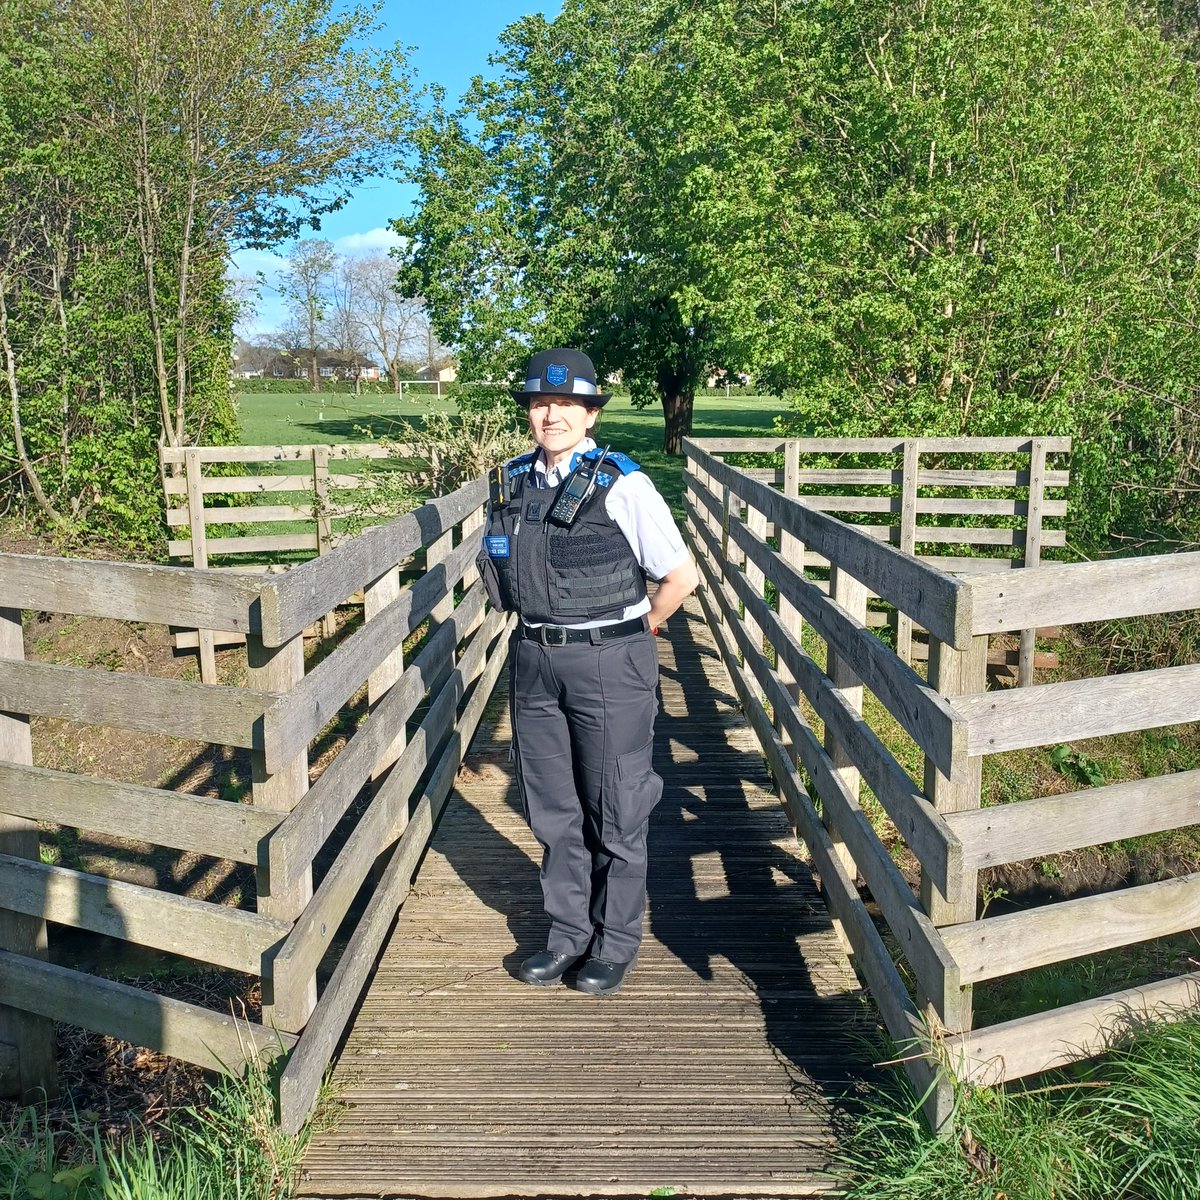 Pleased to introduce PCSO Wakefield who has recently joined us at Stanmore SNT. PCSO Wakefield is looking forward to getting to know the ward and tackling any issues. #saferneighbourhoods